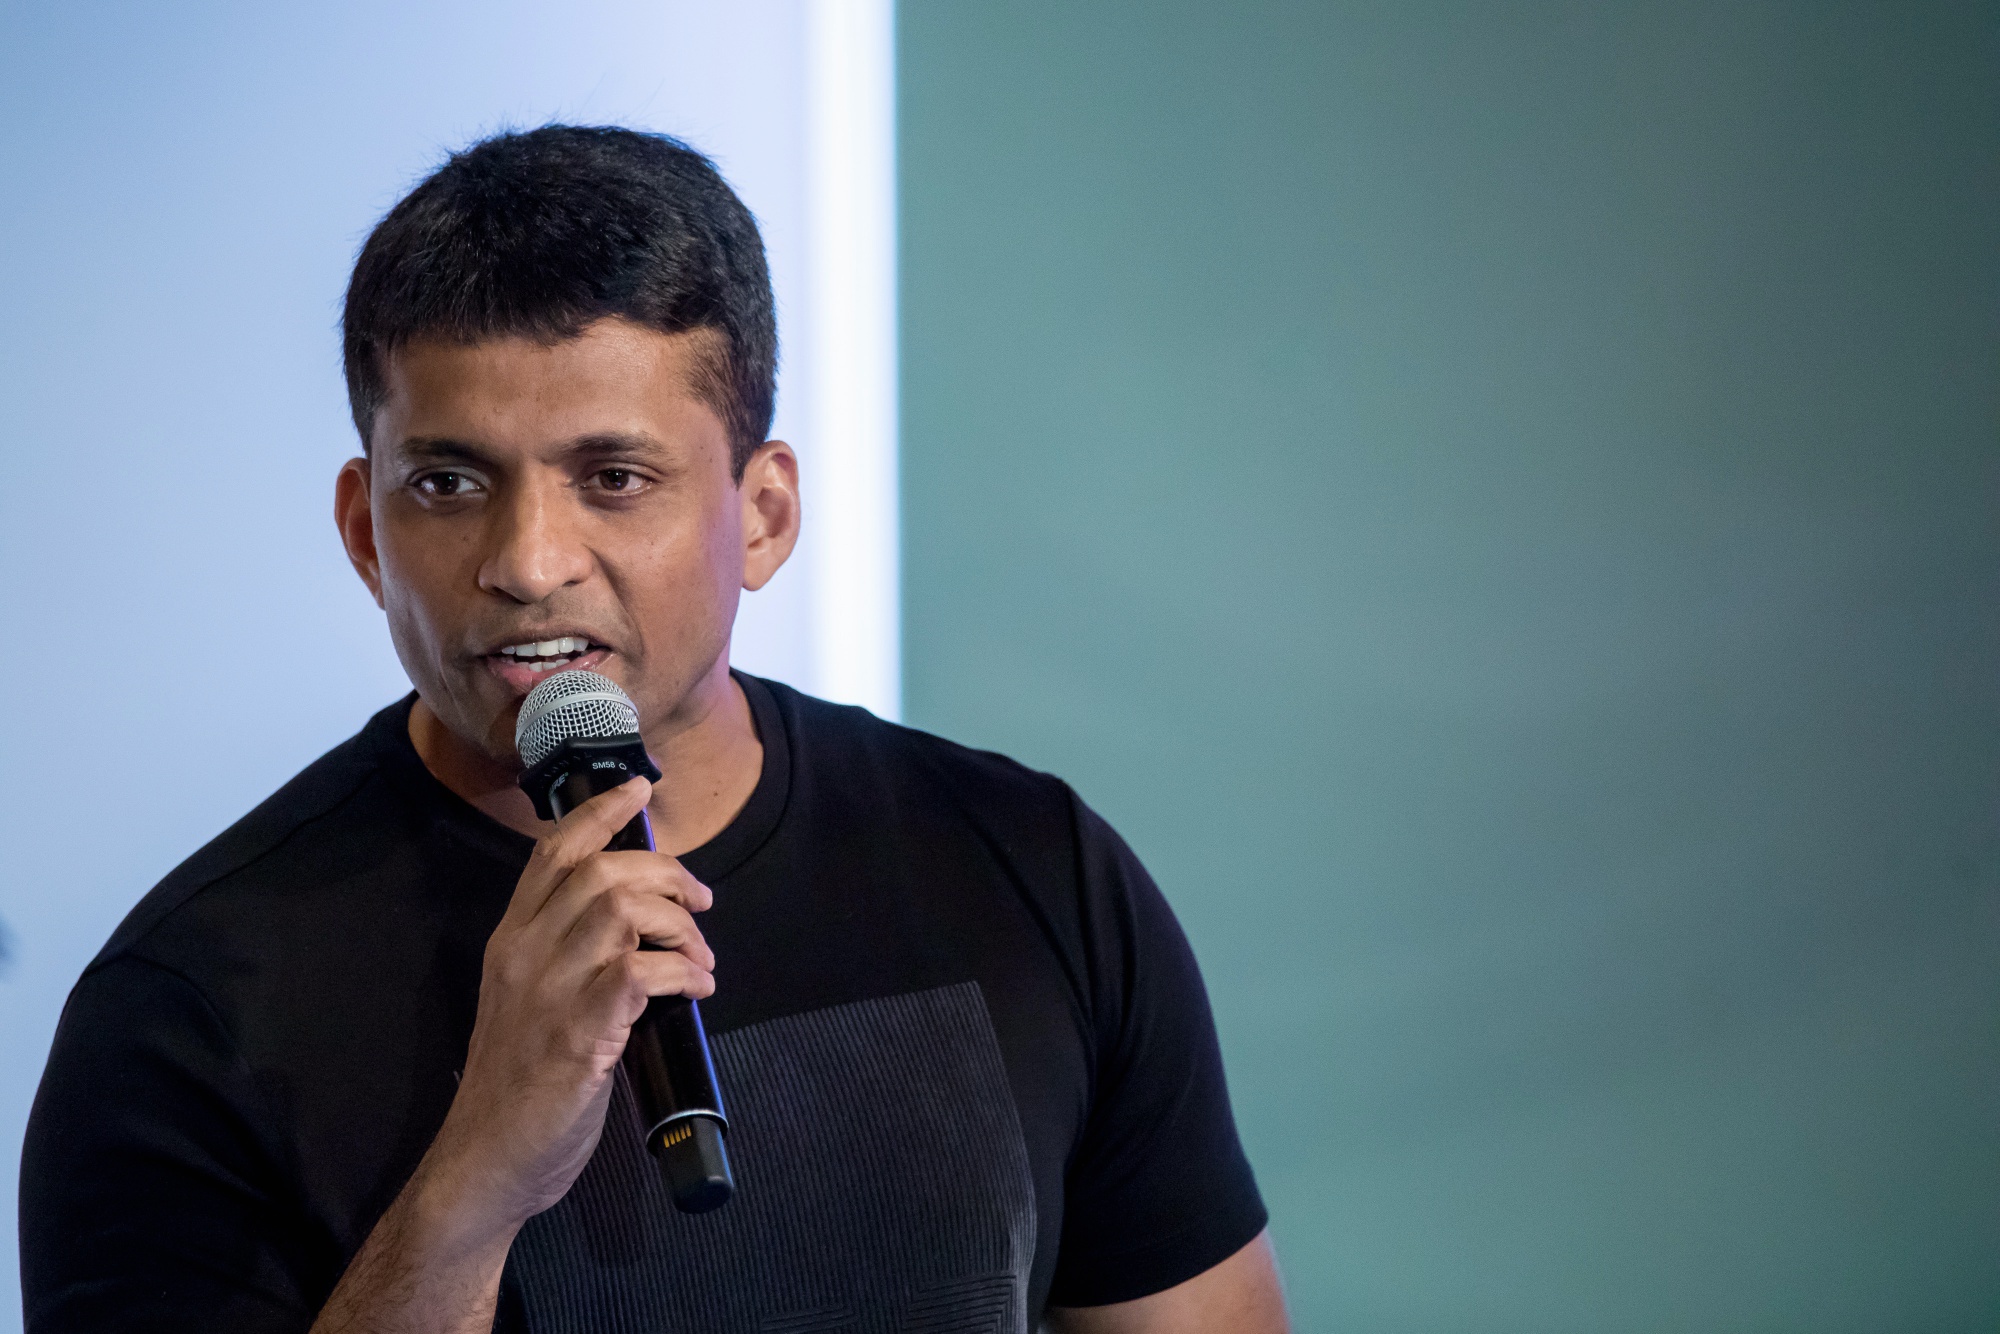 Byju's in Talks to Sell US Unit Epic for $400 Million to Joffre - Bloomberg